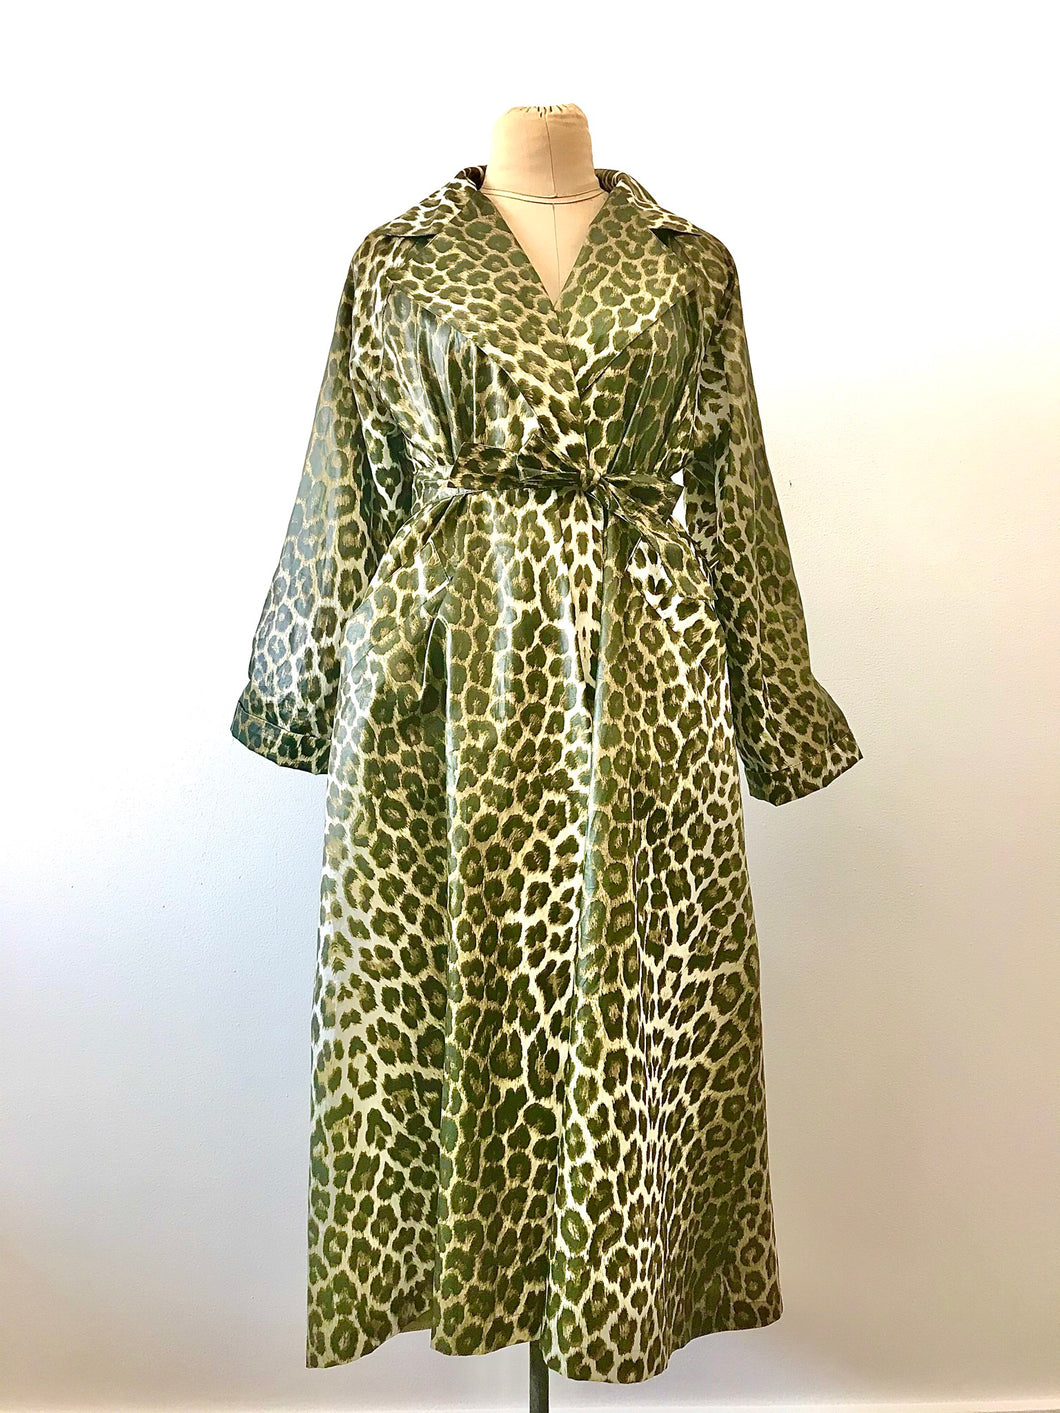 1980's Leopard Print Trench Coat by Court Royal